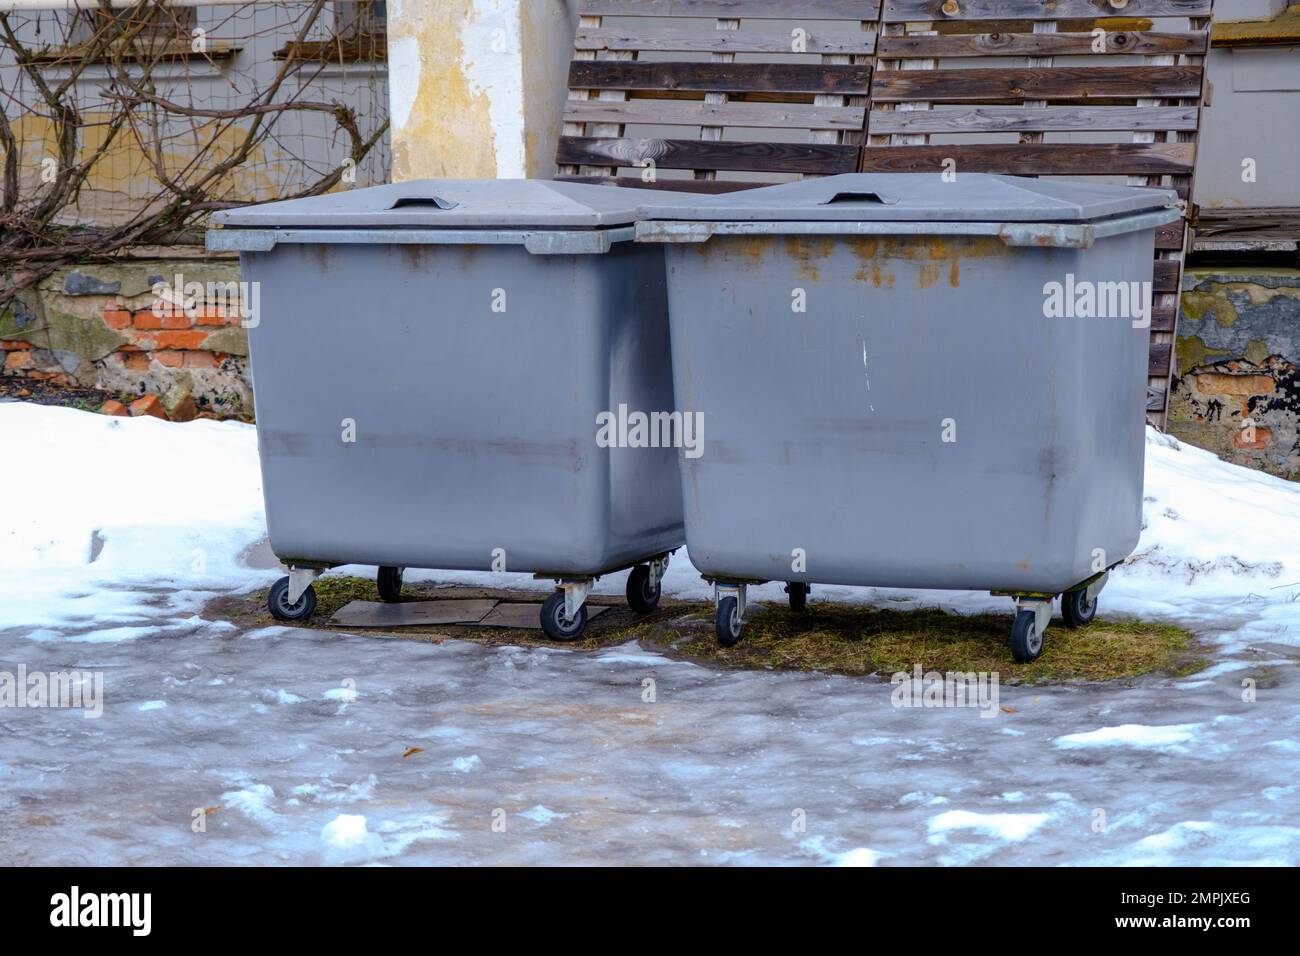 https://c8.alamy.com/comp/2MPJXEG/plastic-large-trash-cans-with-lids-and-trash-inside-against-an-orange-brick-wall-large-gray-plastic-trash-cans-on-a-city-street-waste-containers-re-2MPJXEG.jpg